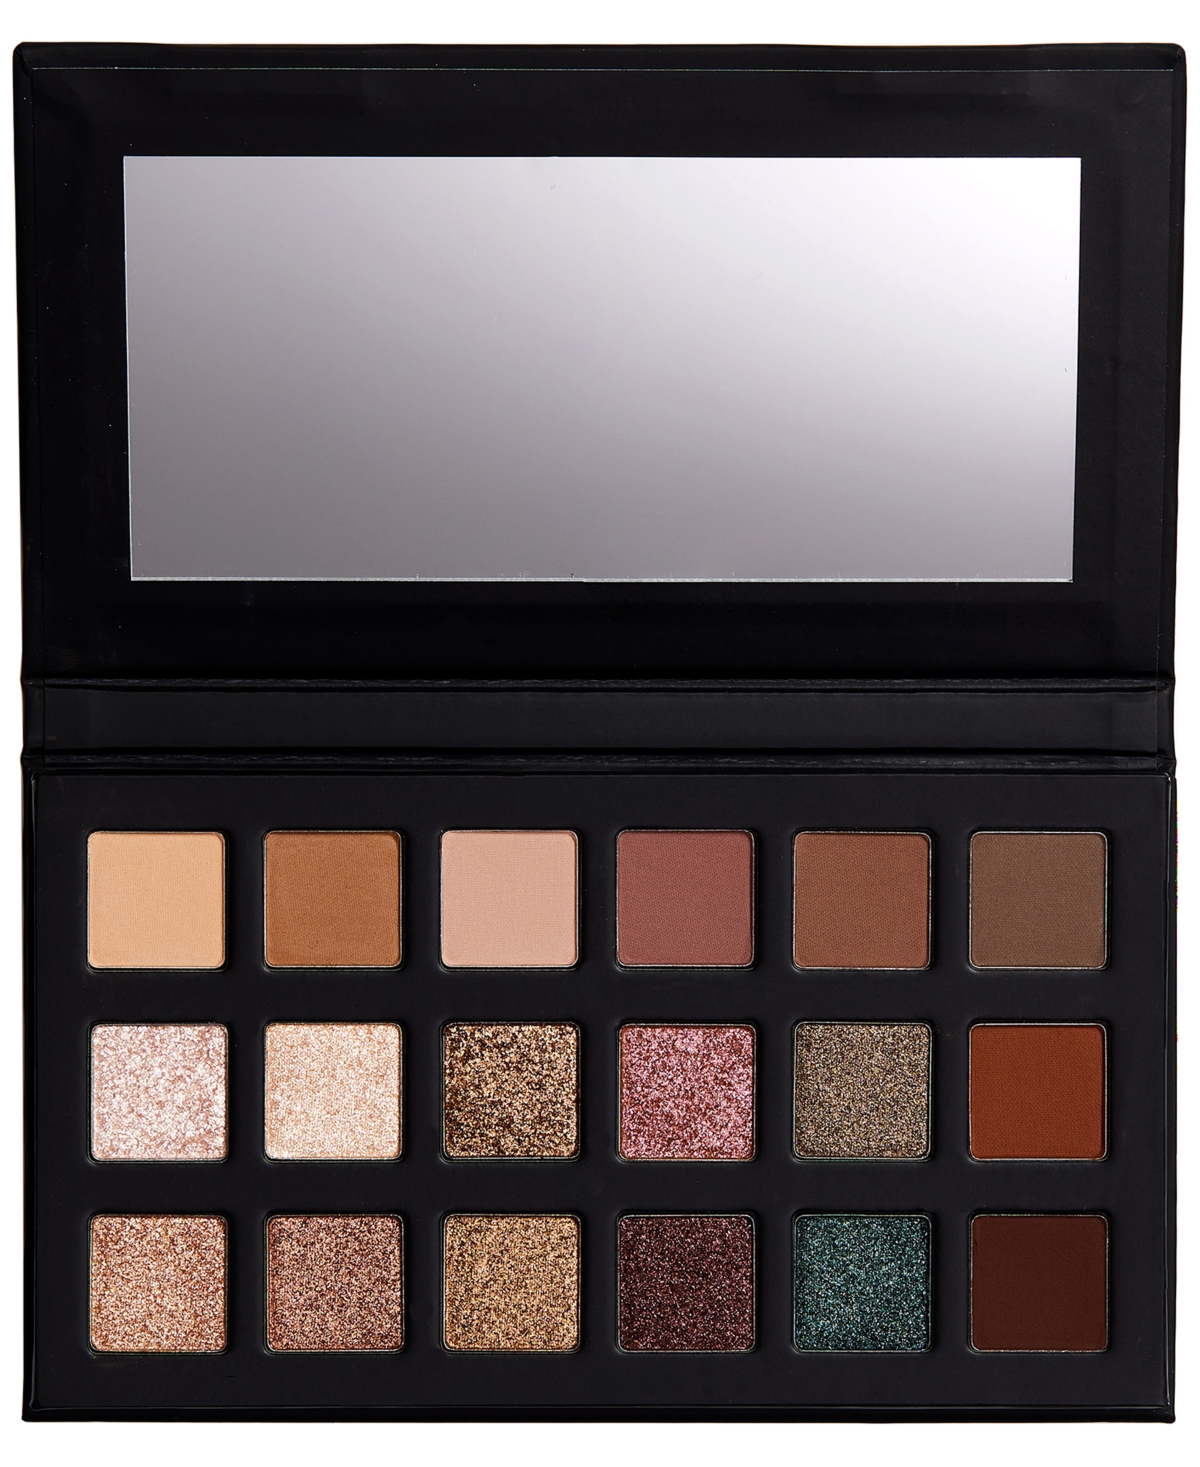 Pro Palette - Fairytale Forest - Fairytale Forest